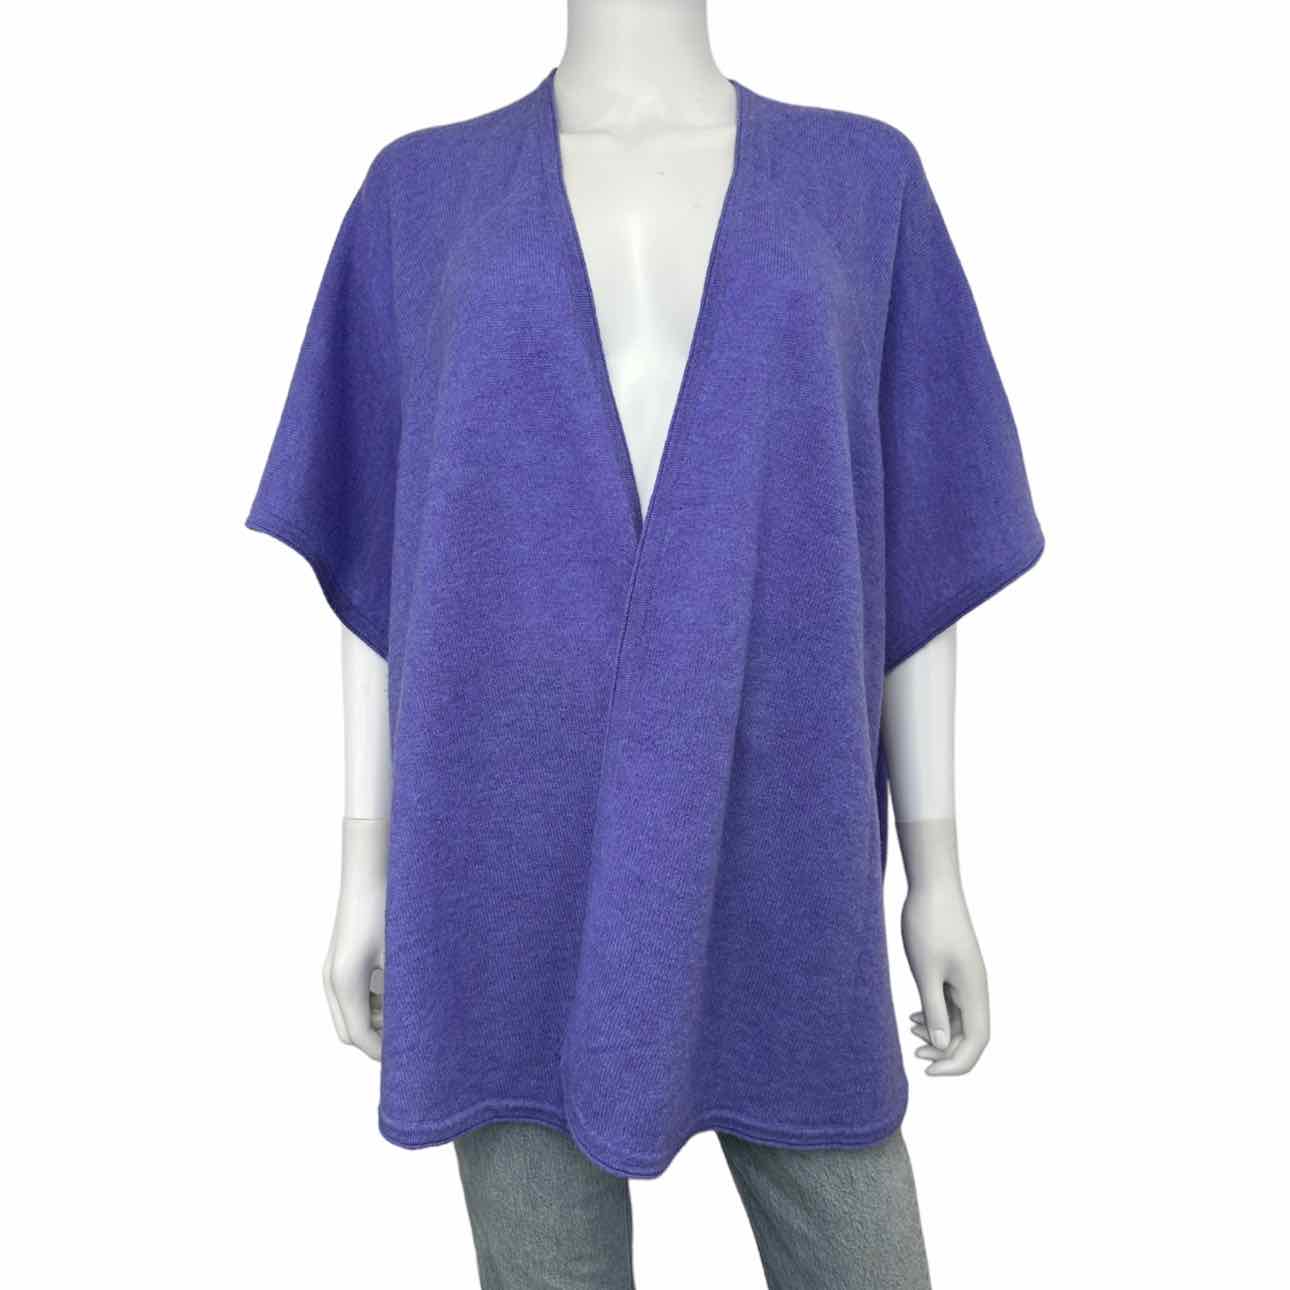 Soft and cozy purple cashmere sweater cardigan ￼